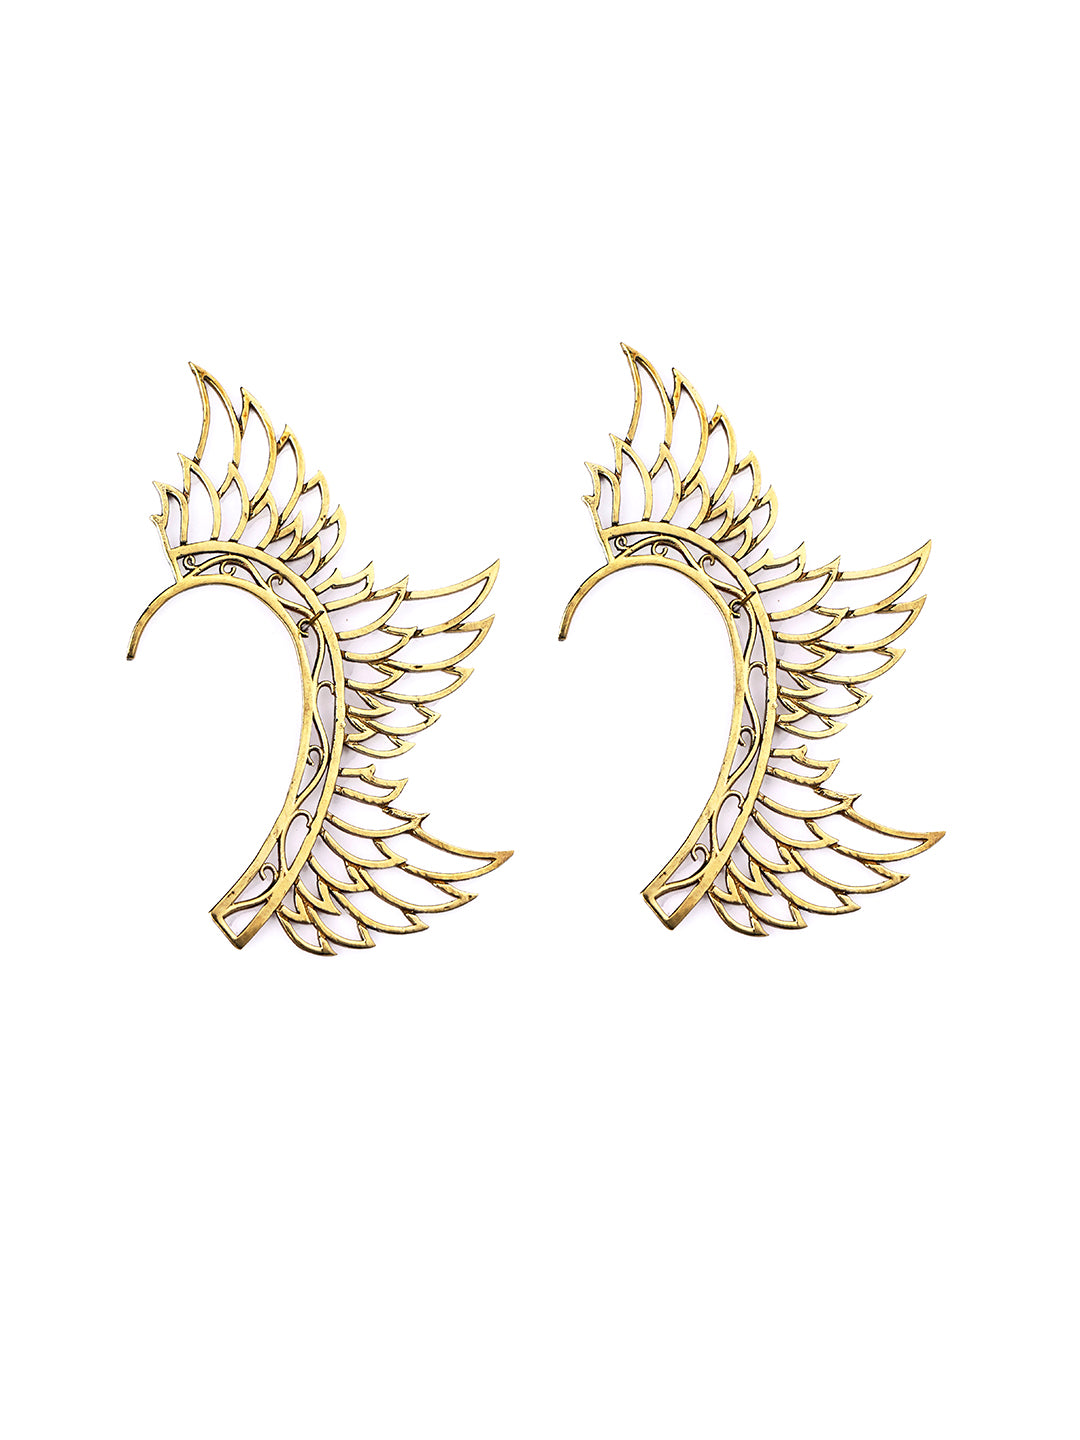 Stylish Party Ear Cuff Earrings - Winged Butterfly Gold and Silver-Toned Contemporary Statement Earrings for Women by Studio One Love